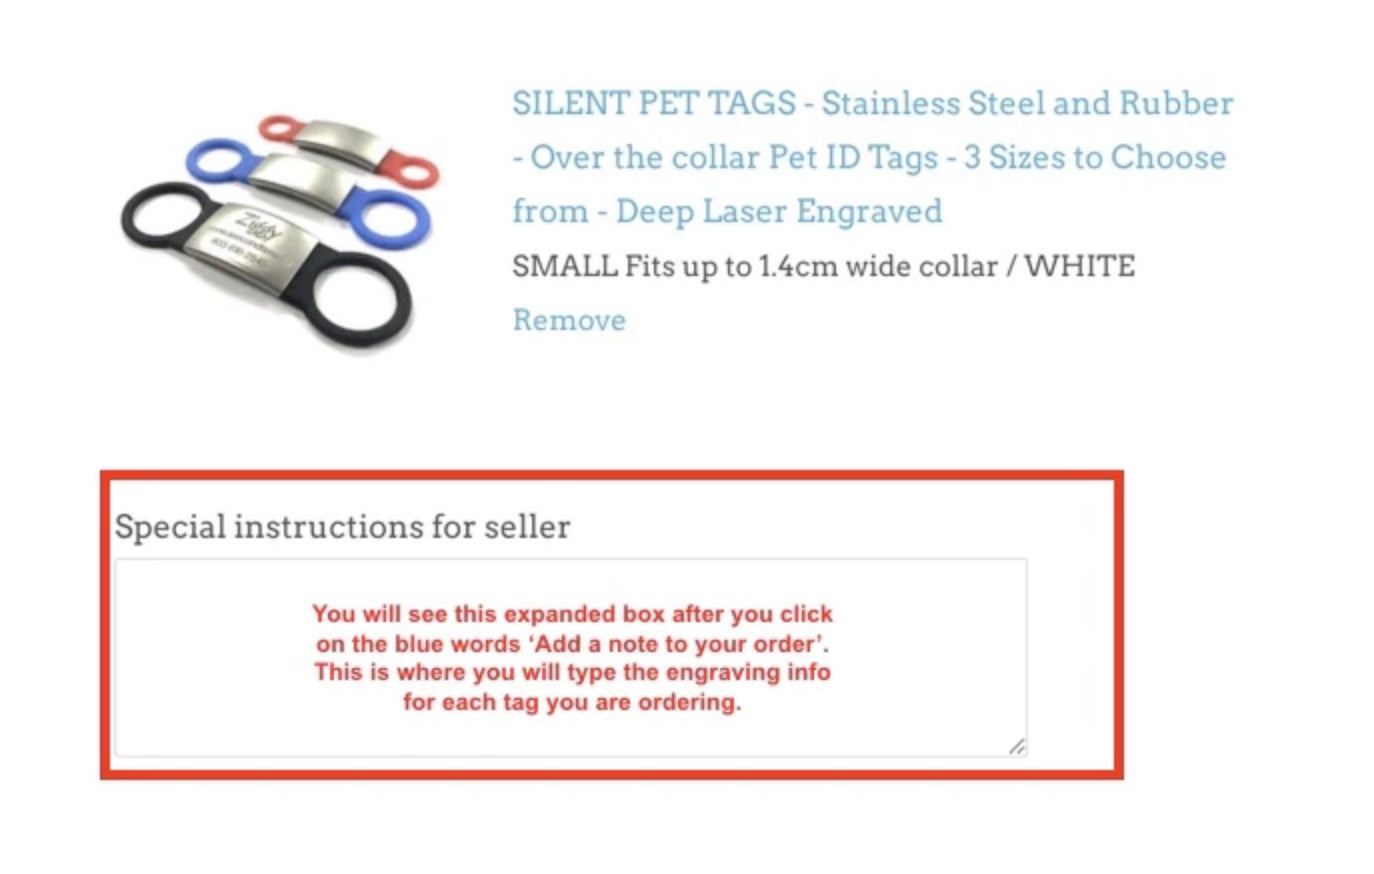 Silicone AirTag Holder - for dog collars, backpacks and more!  - Personalized with ID and contact info